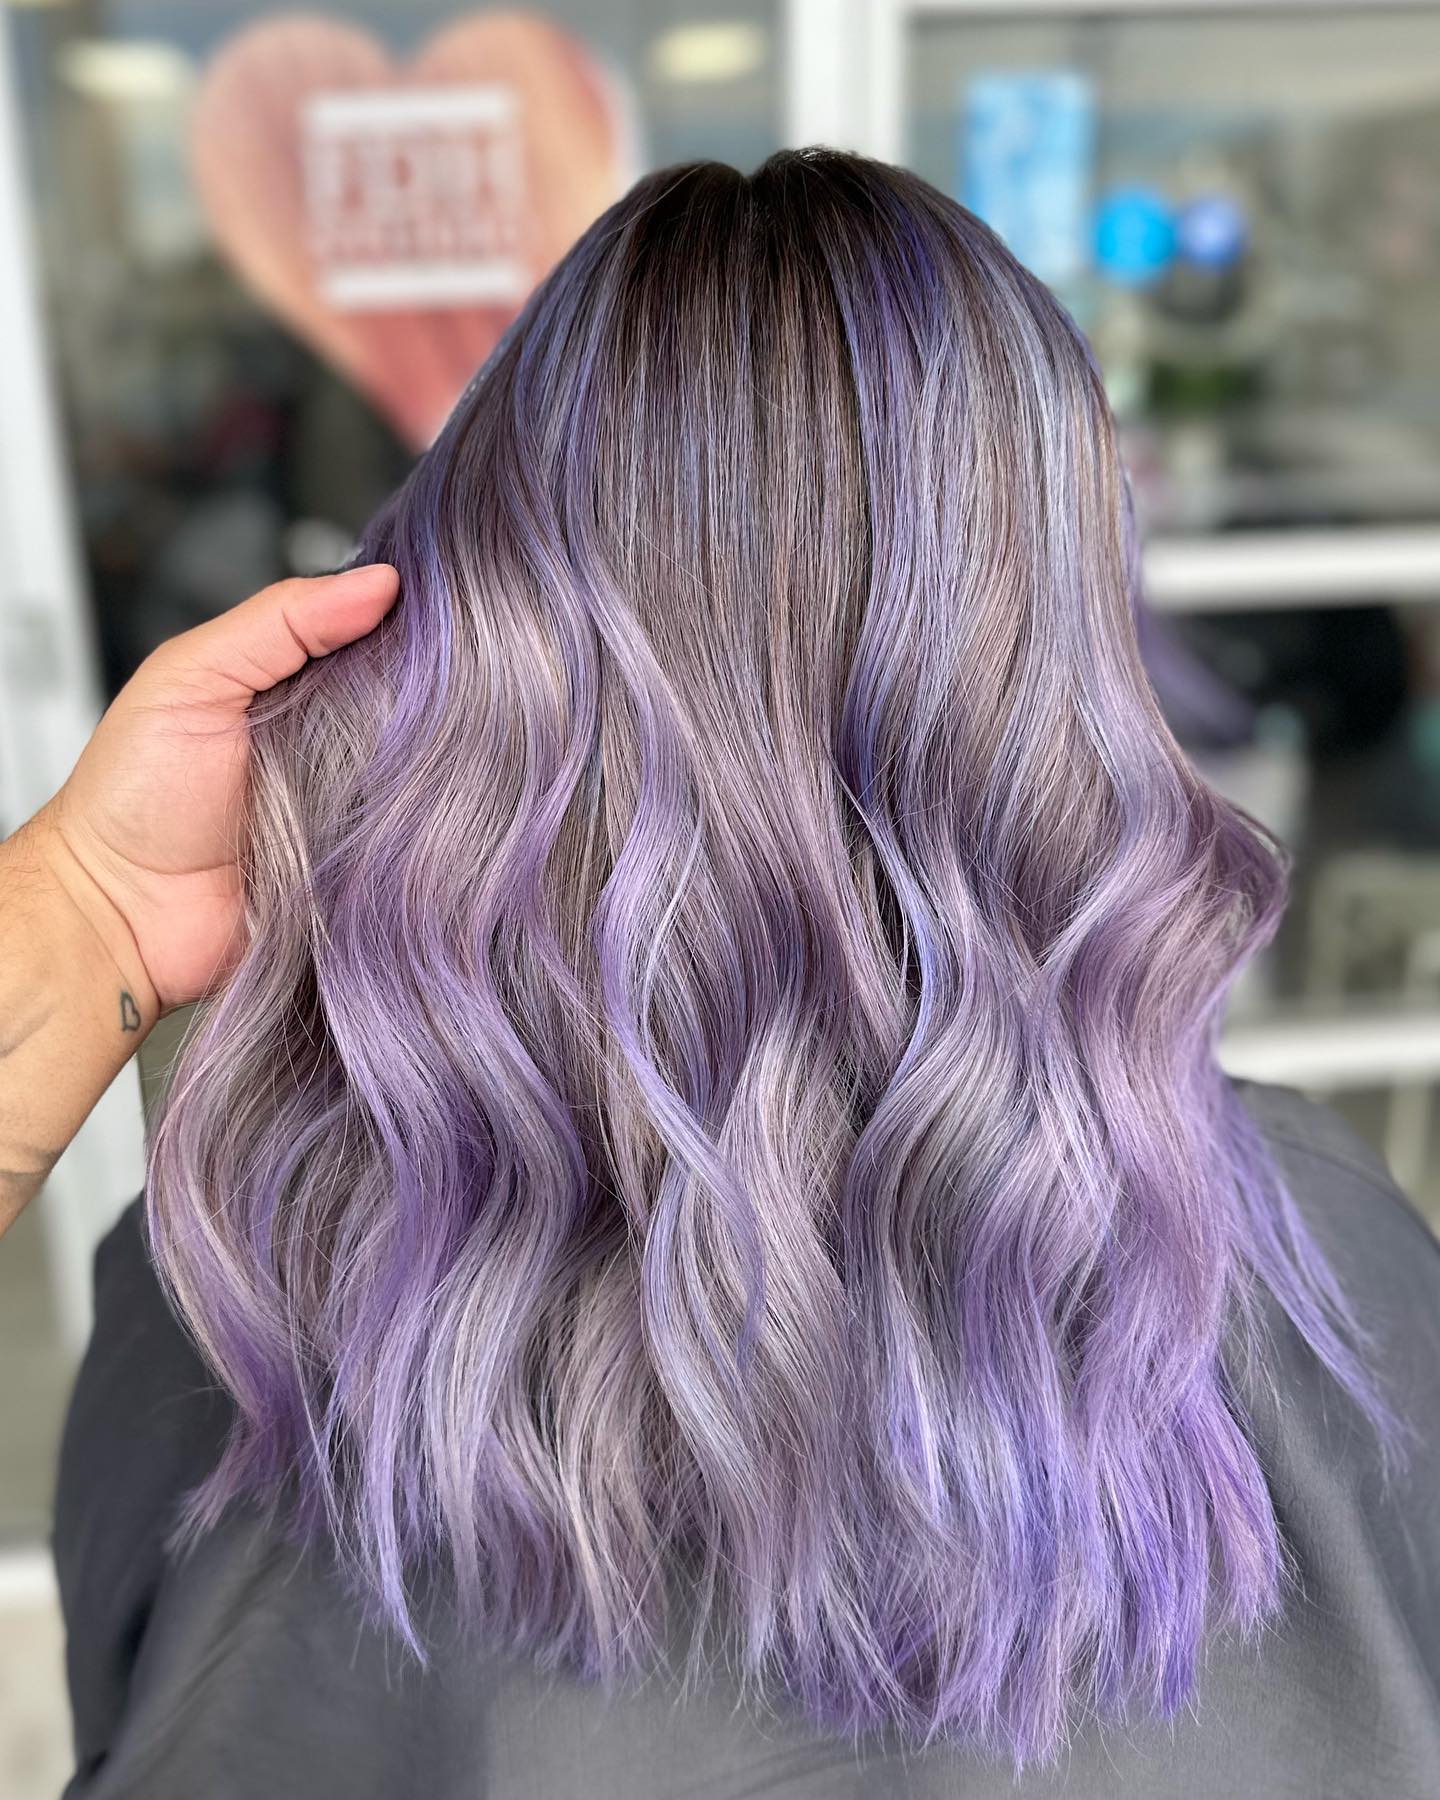 Brown and Light Purple Hair